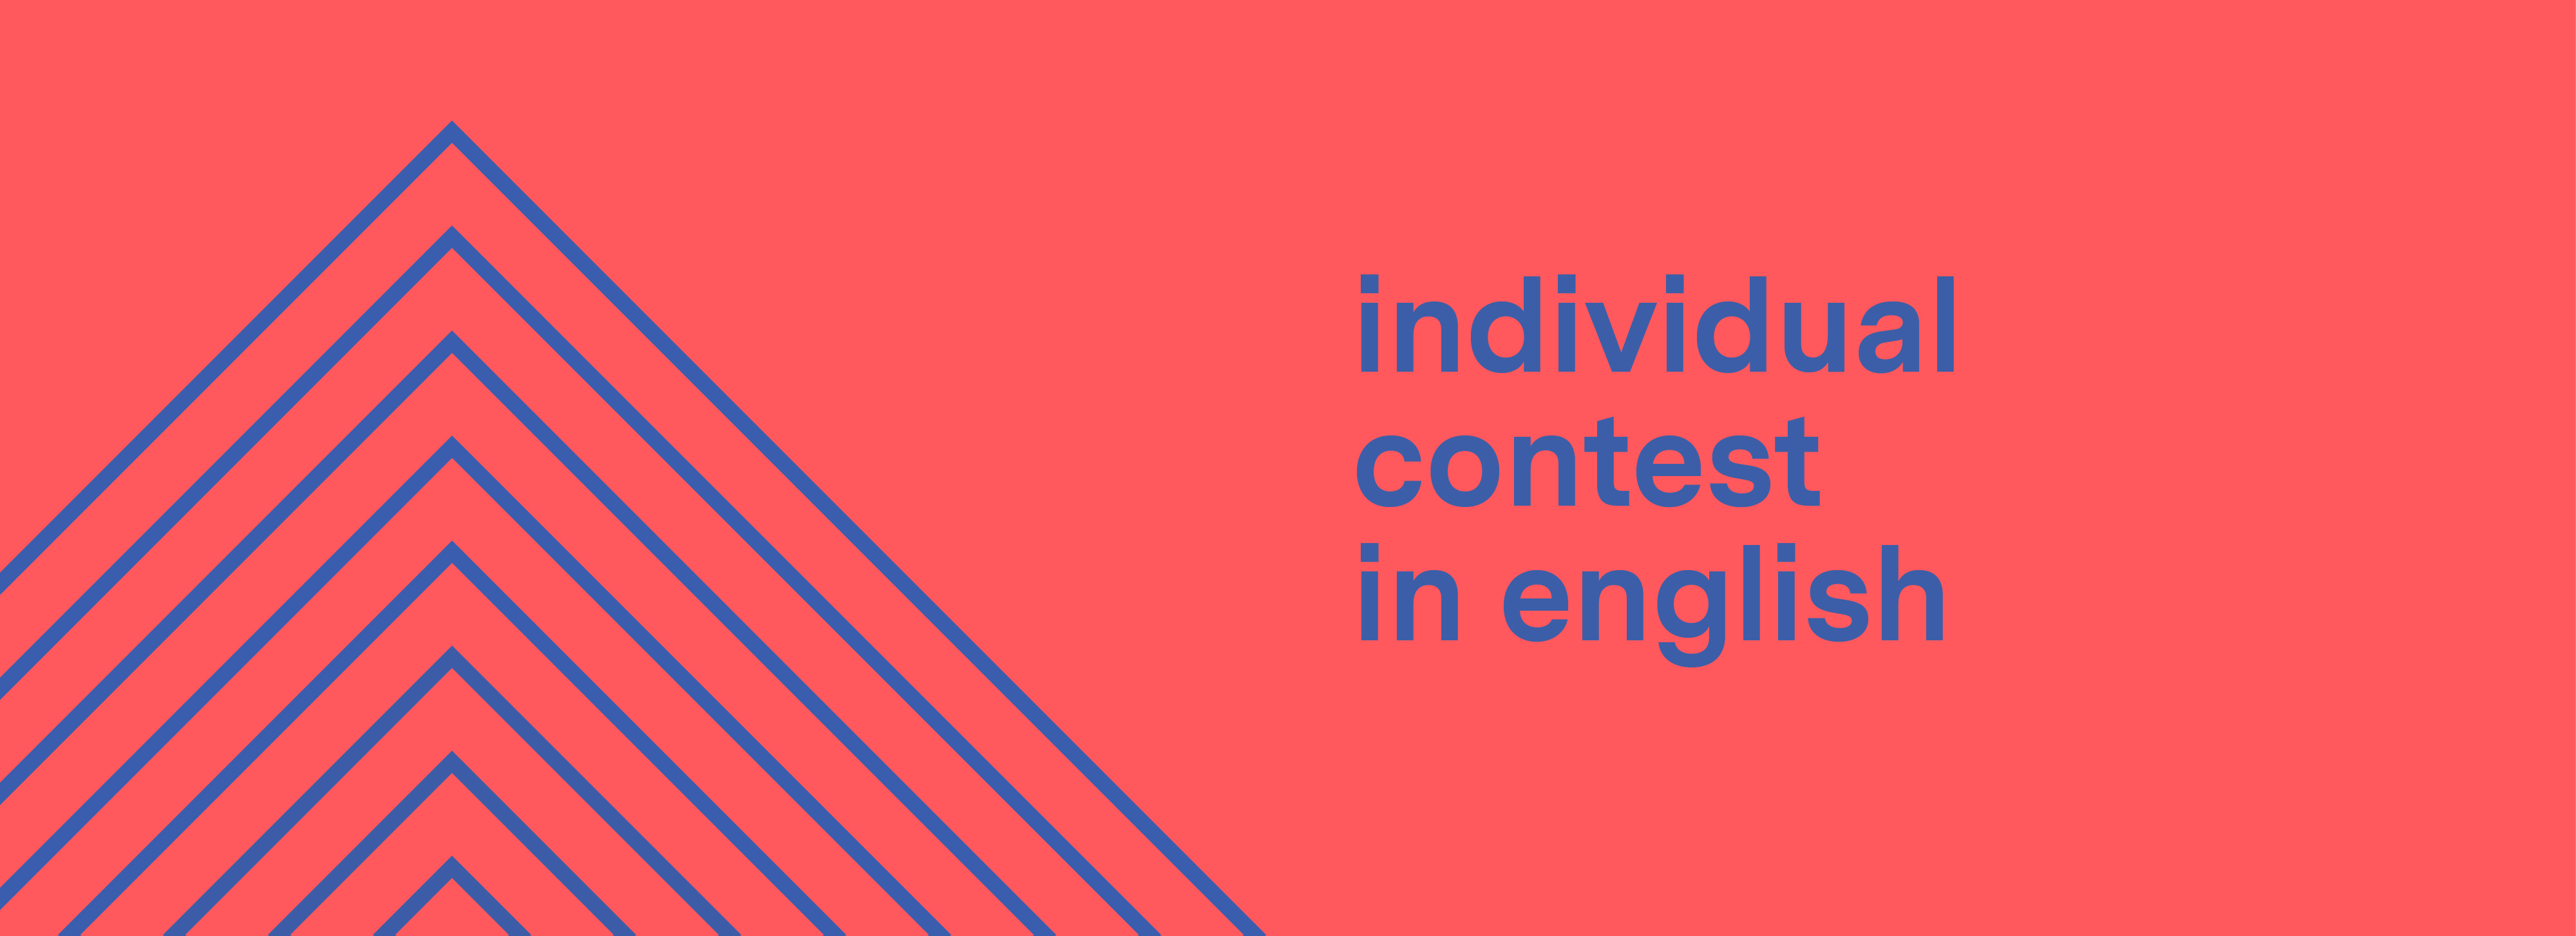 individual-contest-in-english-large